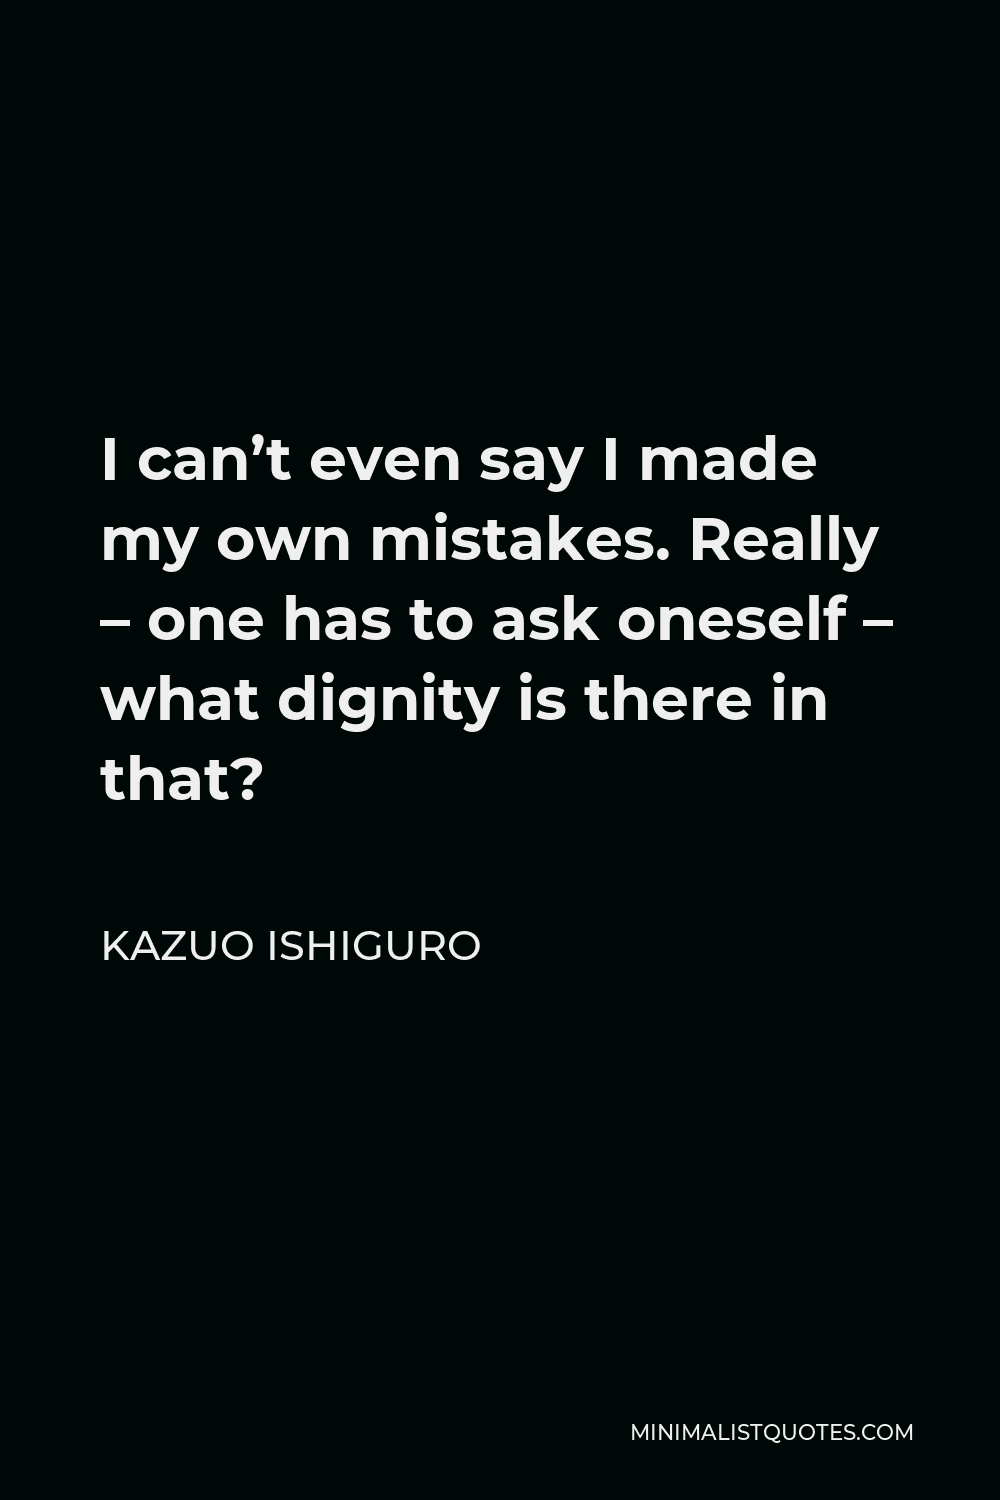 Kazuo Ishiguro Quote - I can’t even say I made my own mistakes. Really – one has to ask oneself – what dignity is there in that?